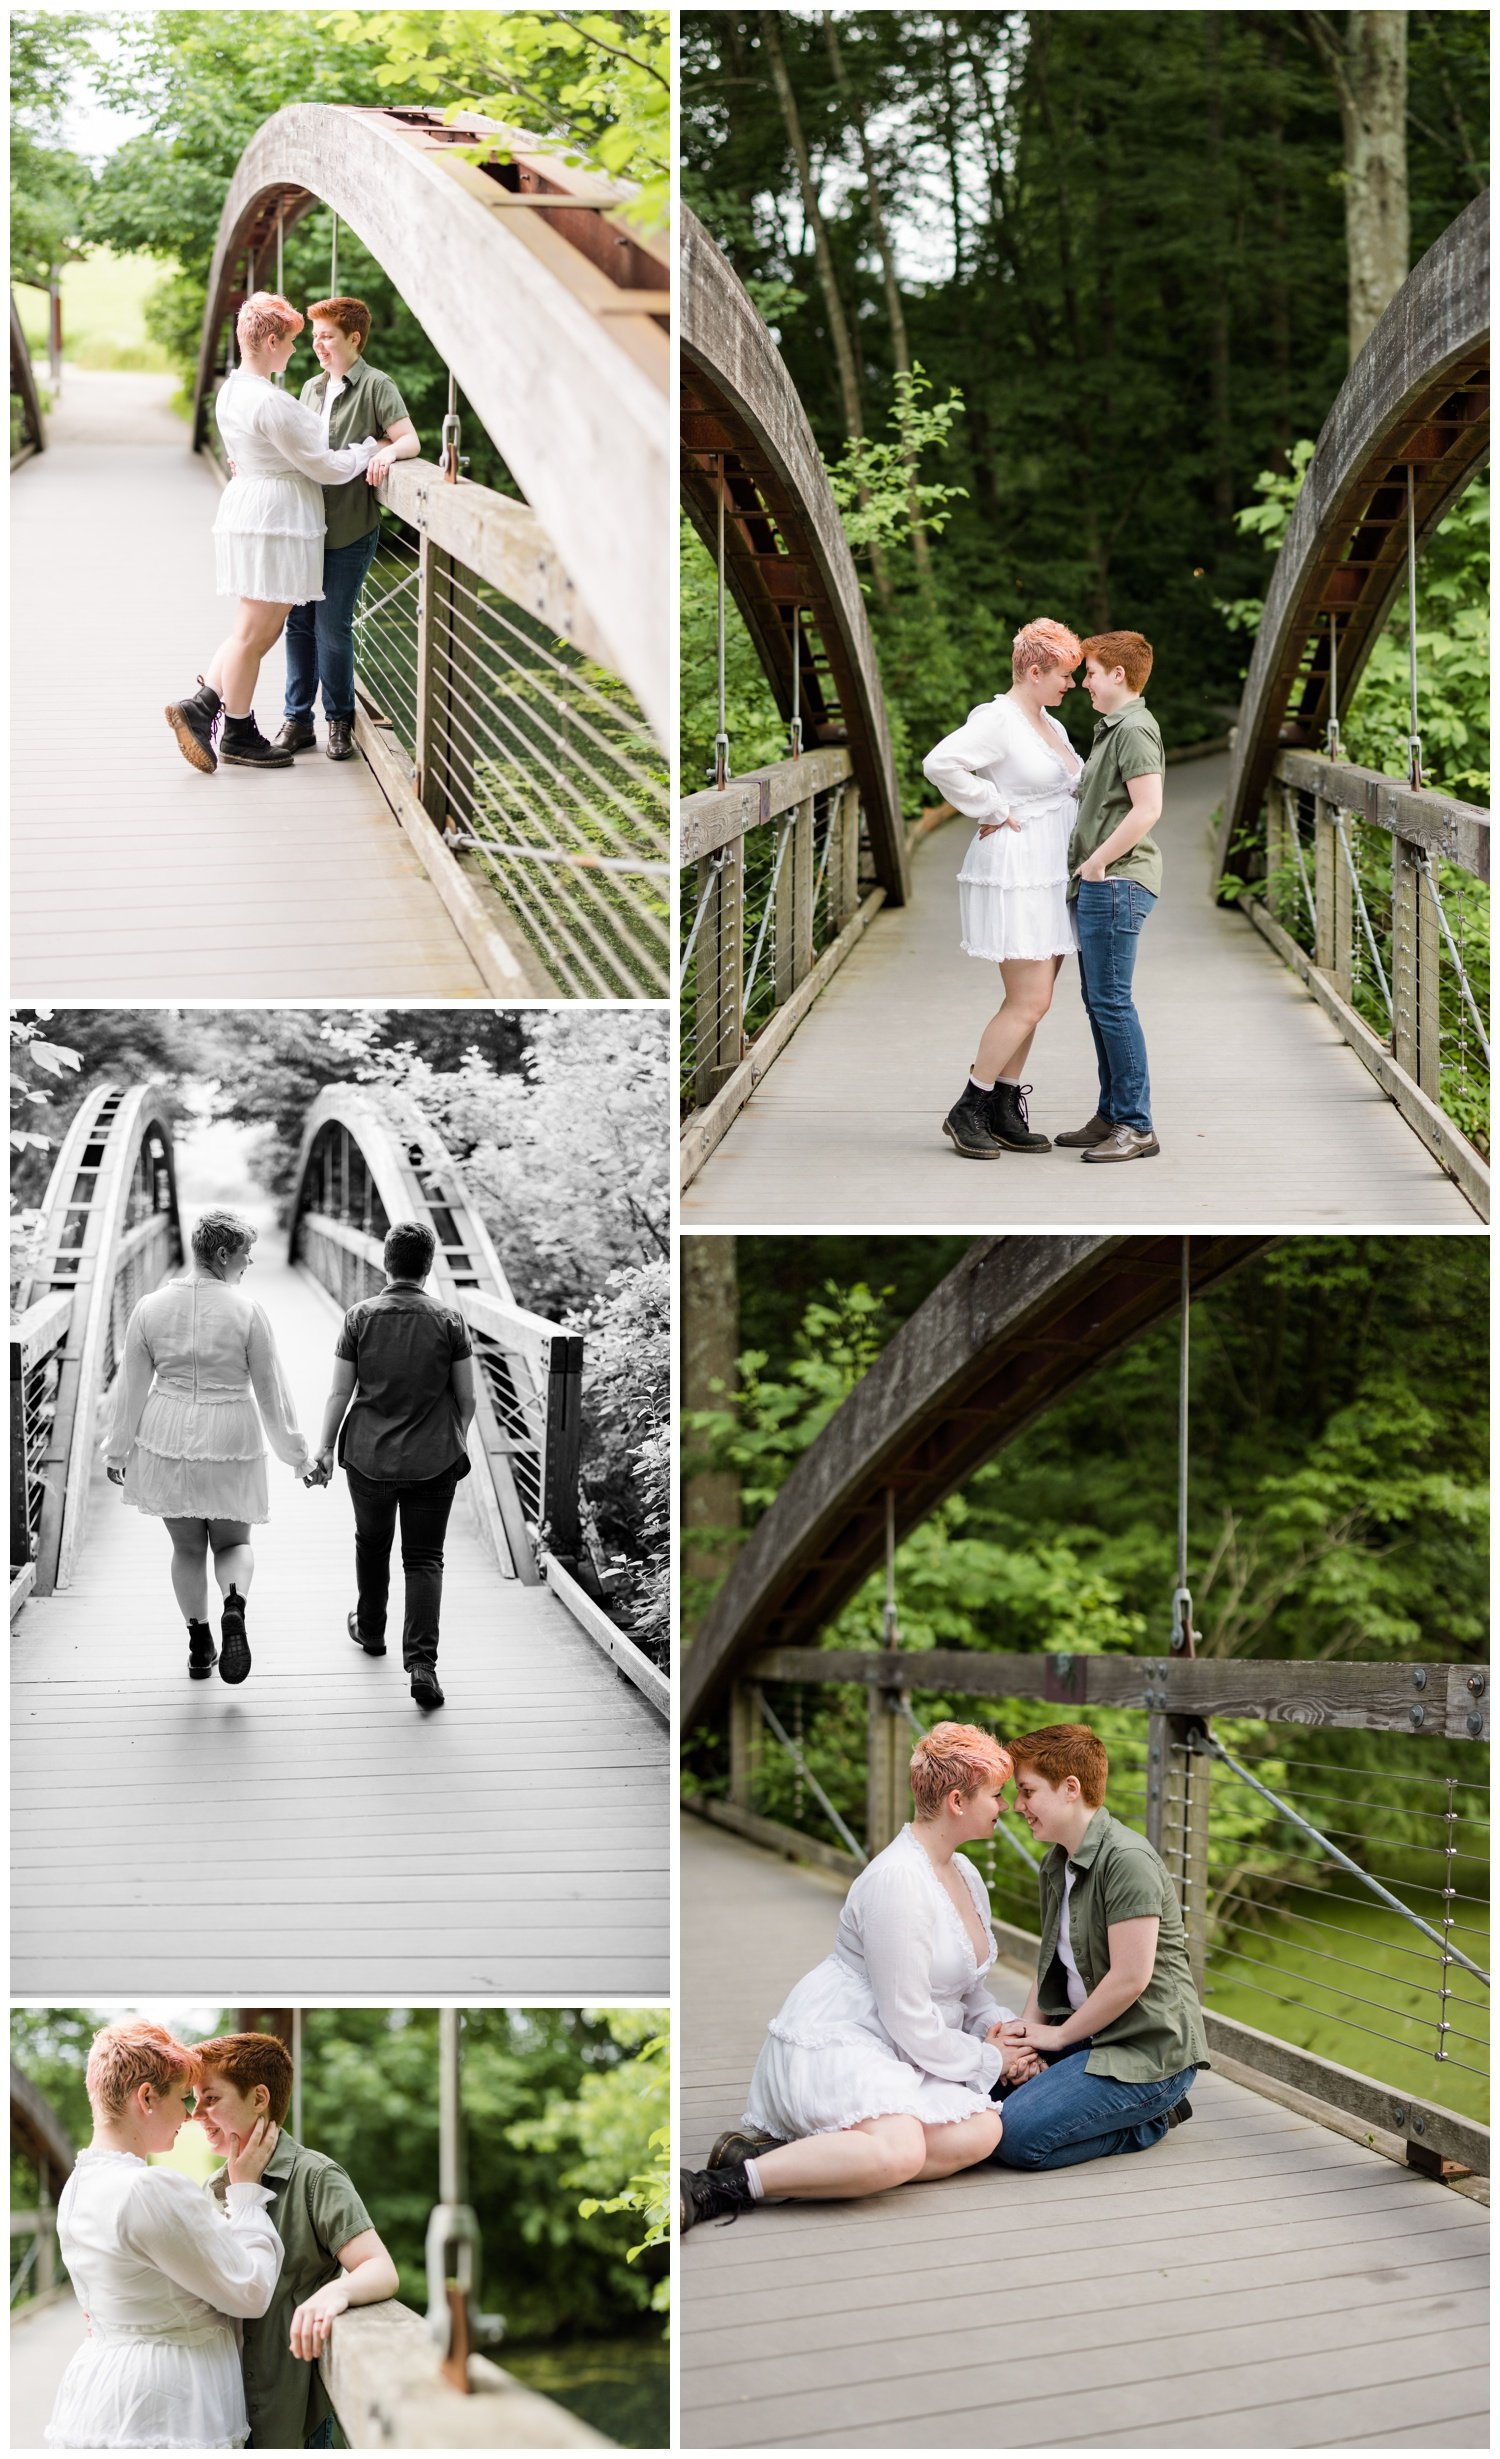 Queer-Engagement-Photos-Longwood-Gardens-Philly-Photographer-LGBTQ-11.jpg